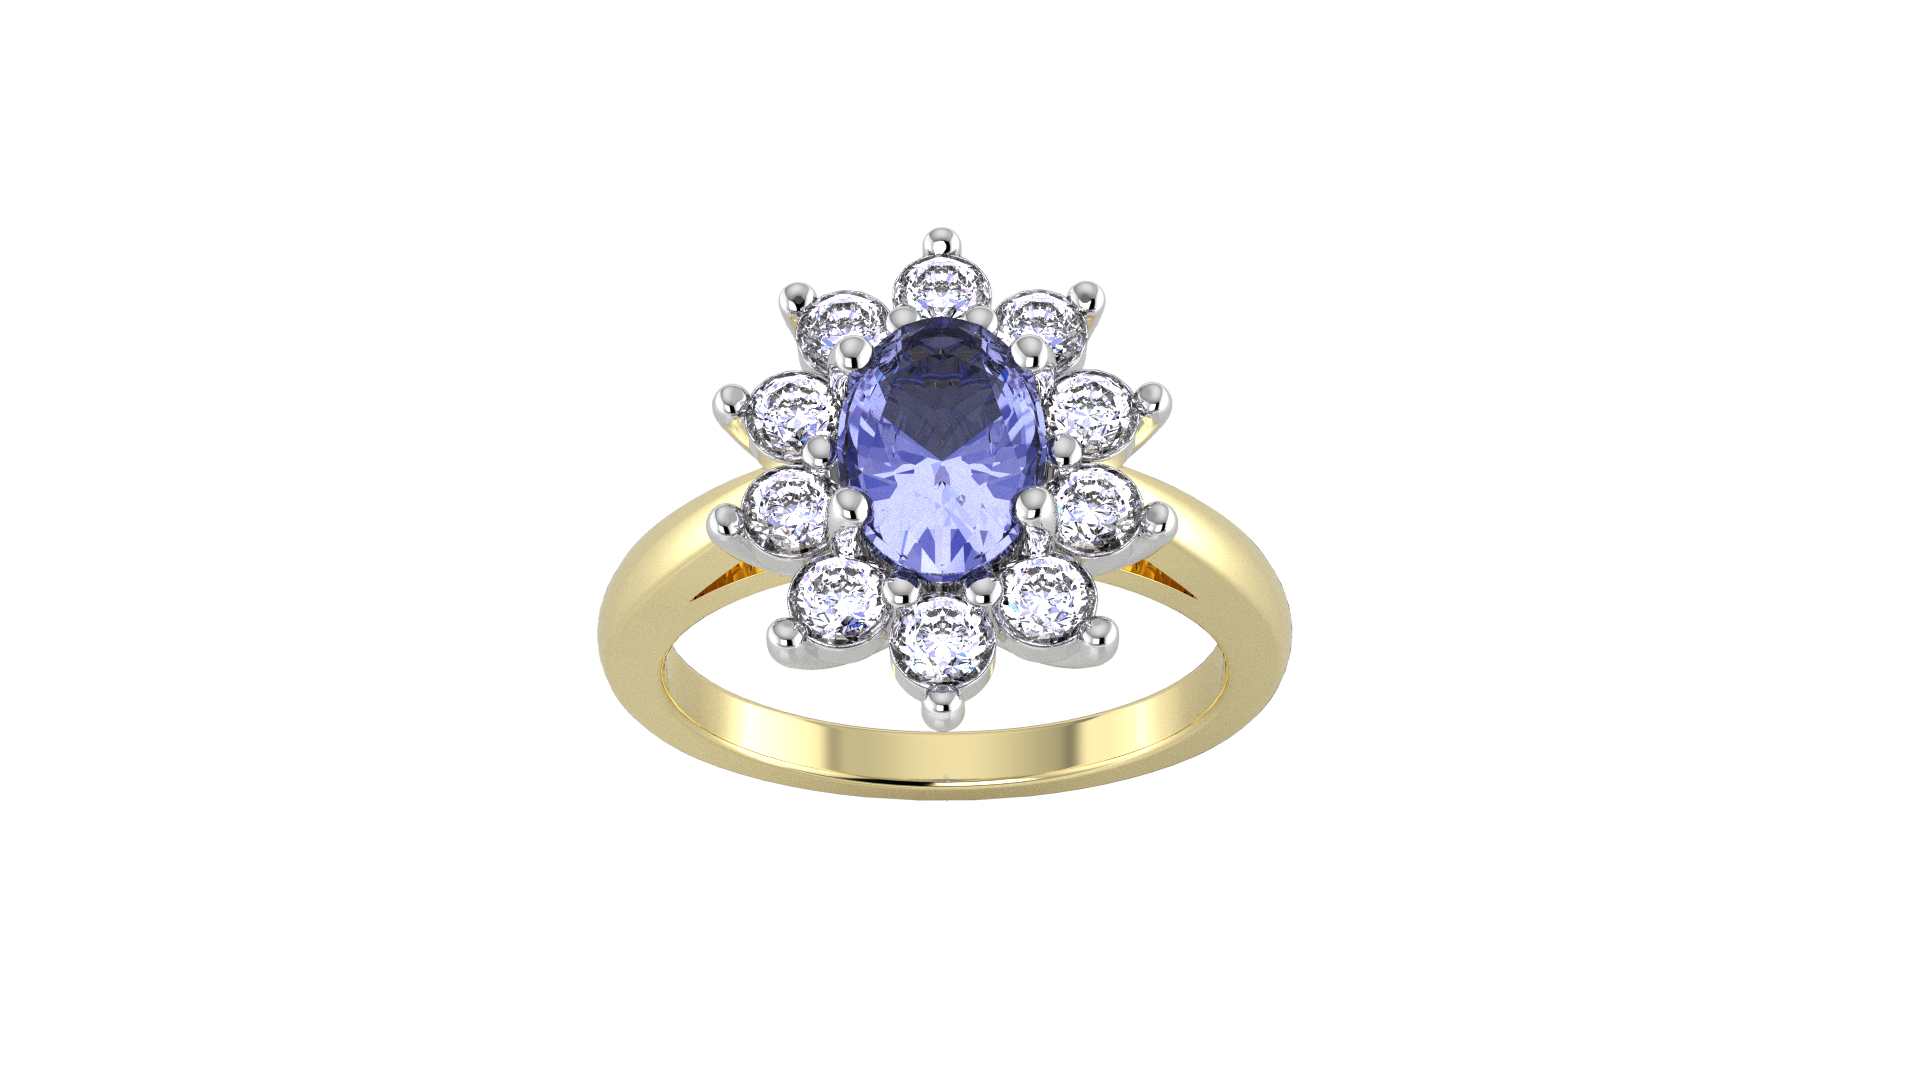 18ct Yellow and White Gold Tanzanite & Diamond Cluster Ring - Ring Size E.5